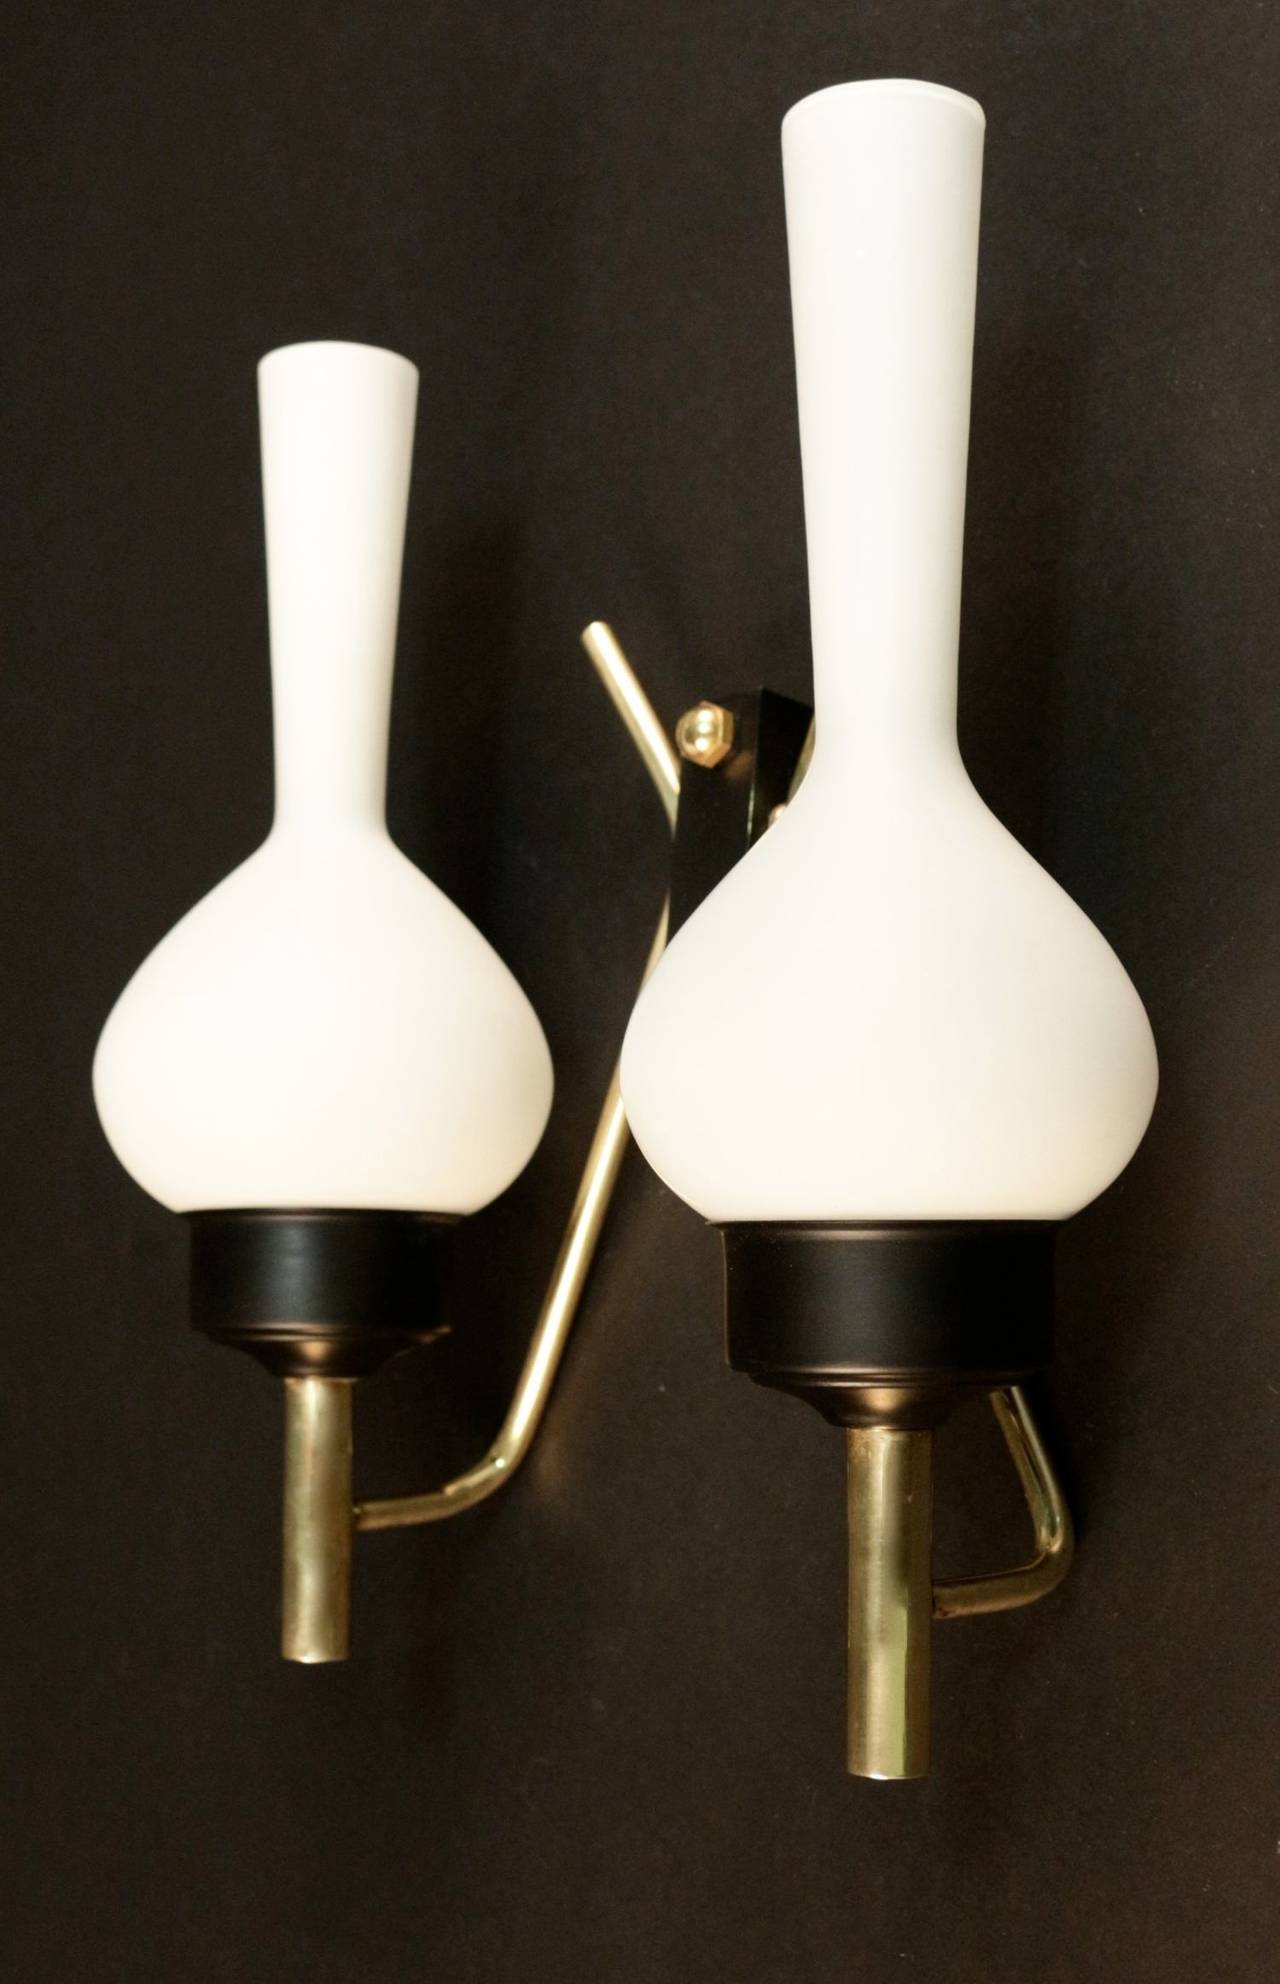 Pair of 1950s 'Spinning Top' sconces attributed to Stilnovo. 
Composed of two brass lighted arms fixed on a backplate decorated with a brass ball. 
Two original spinning top shape lampshades per sconce.